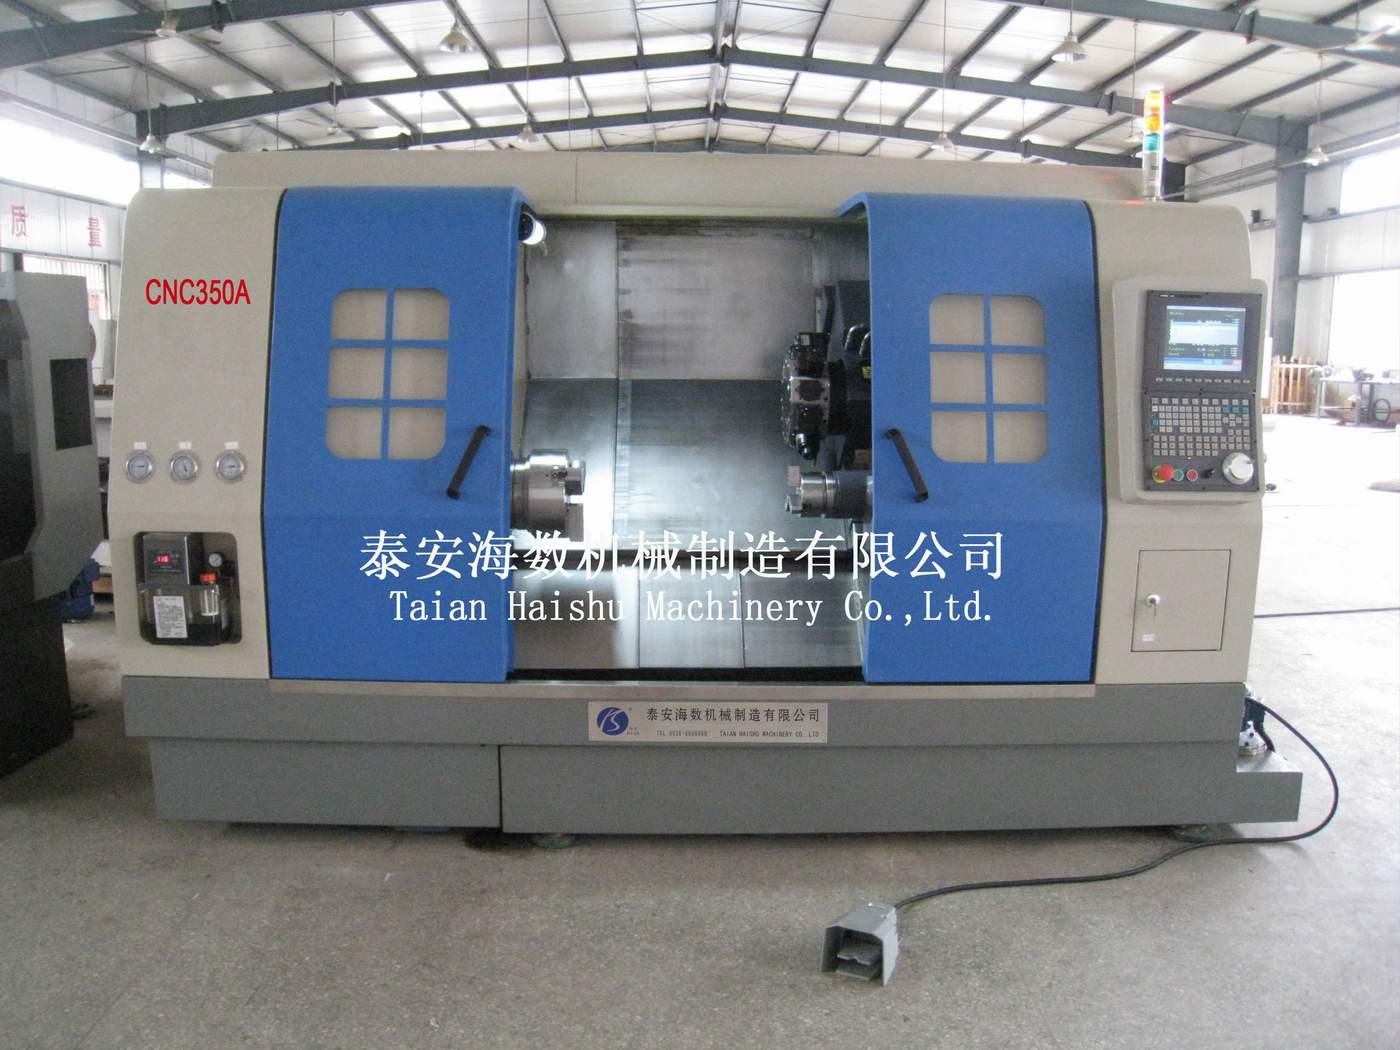 CNC（A）Series two spindle single turret CNC turning center